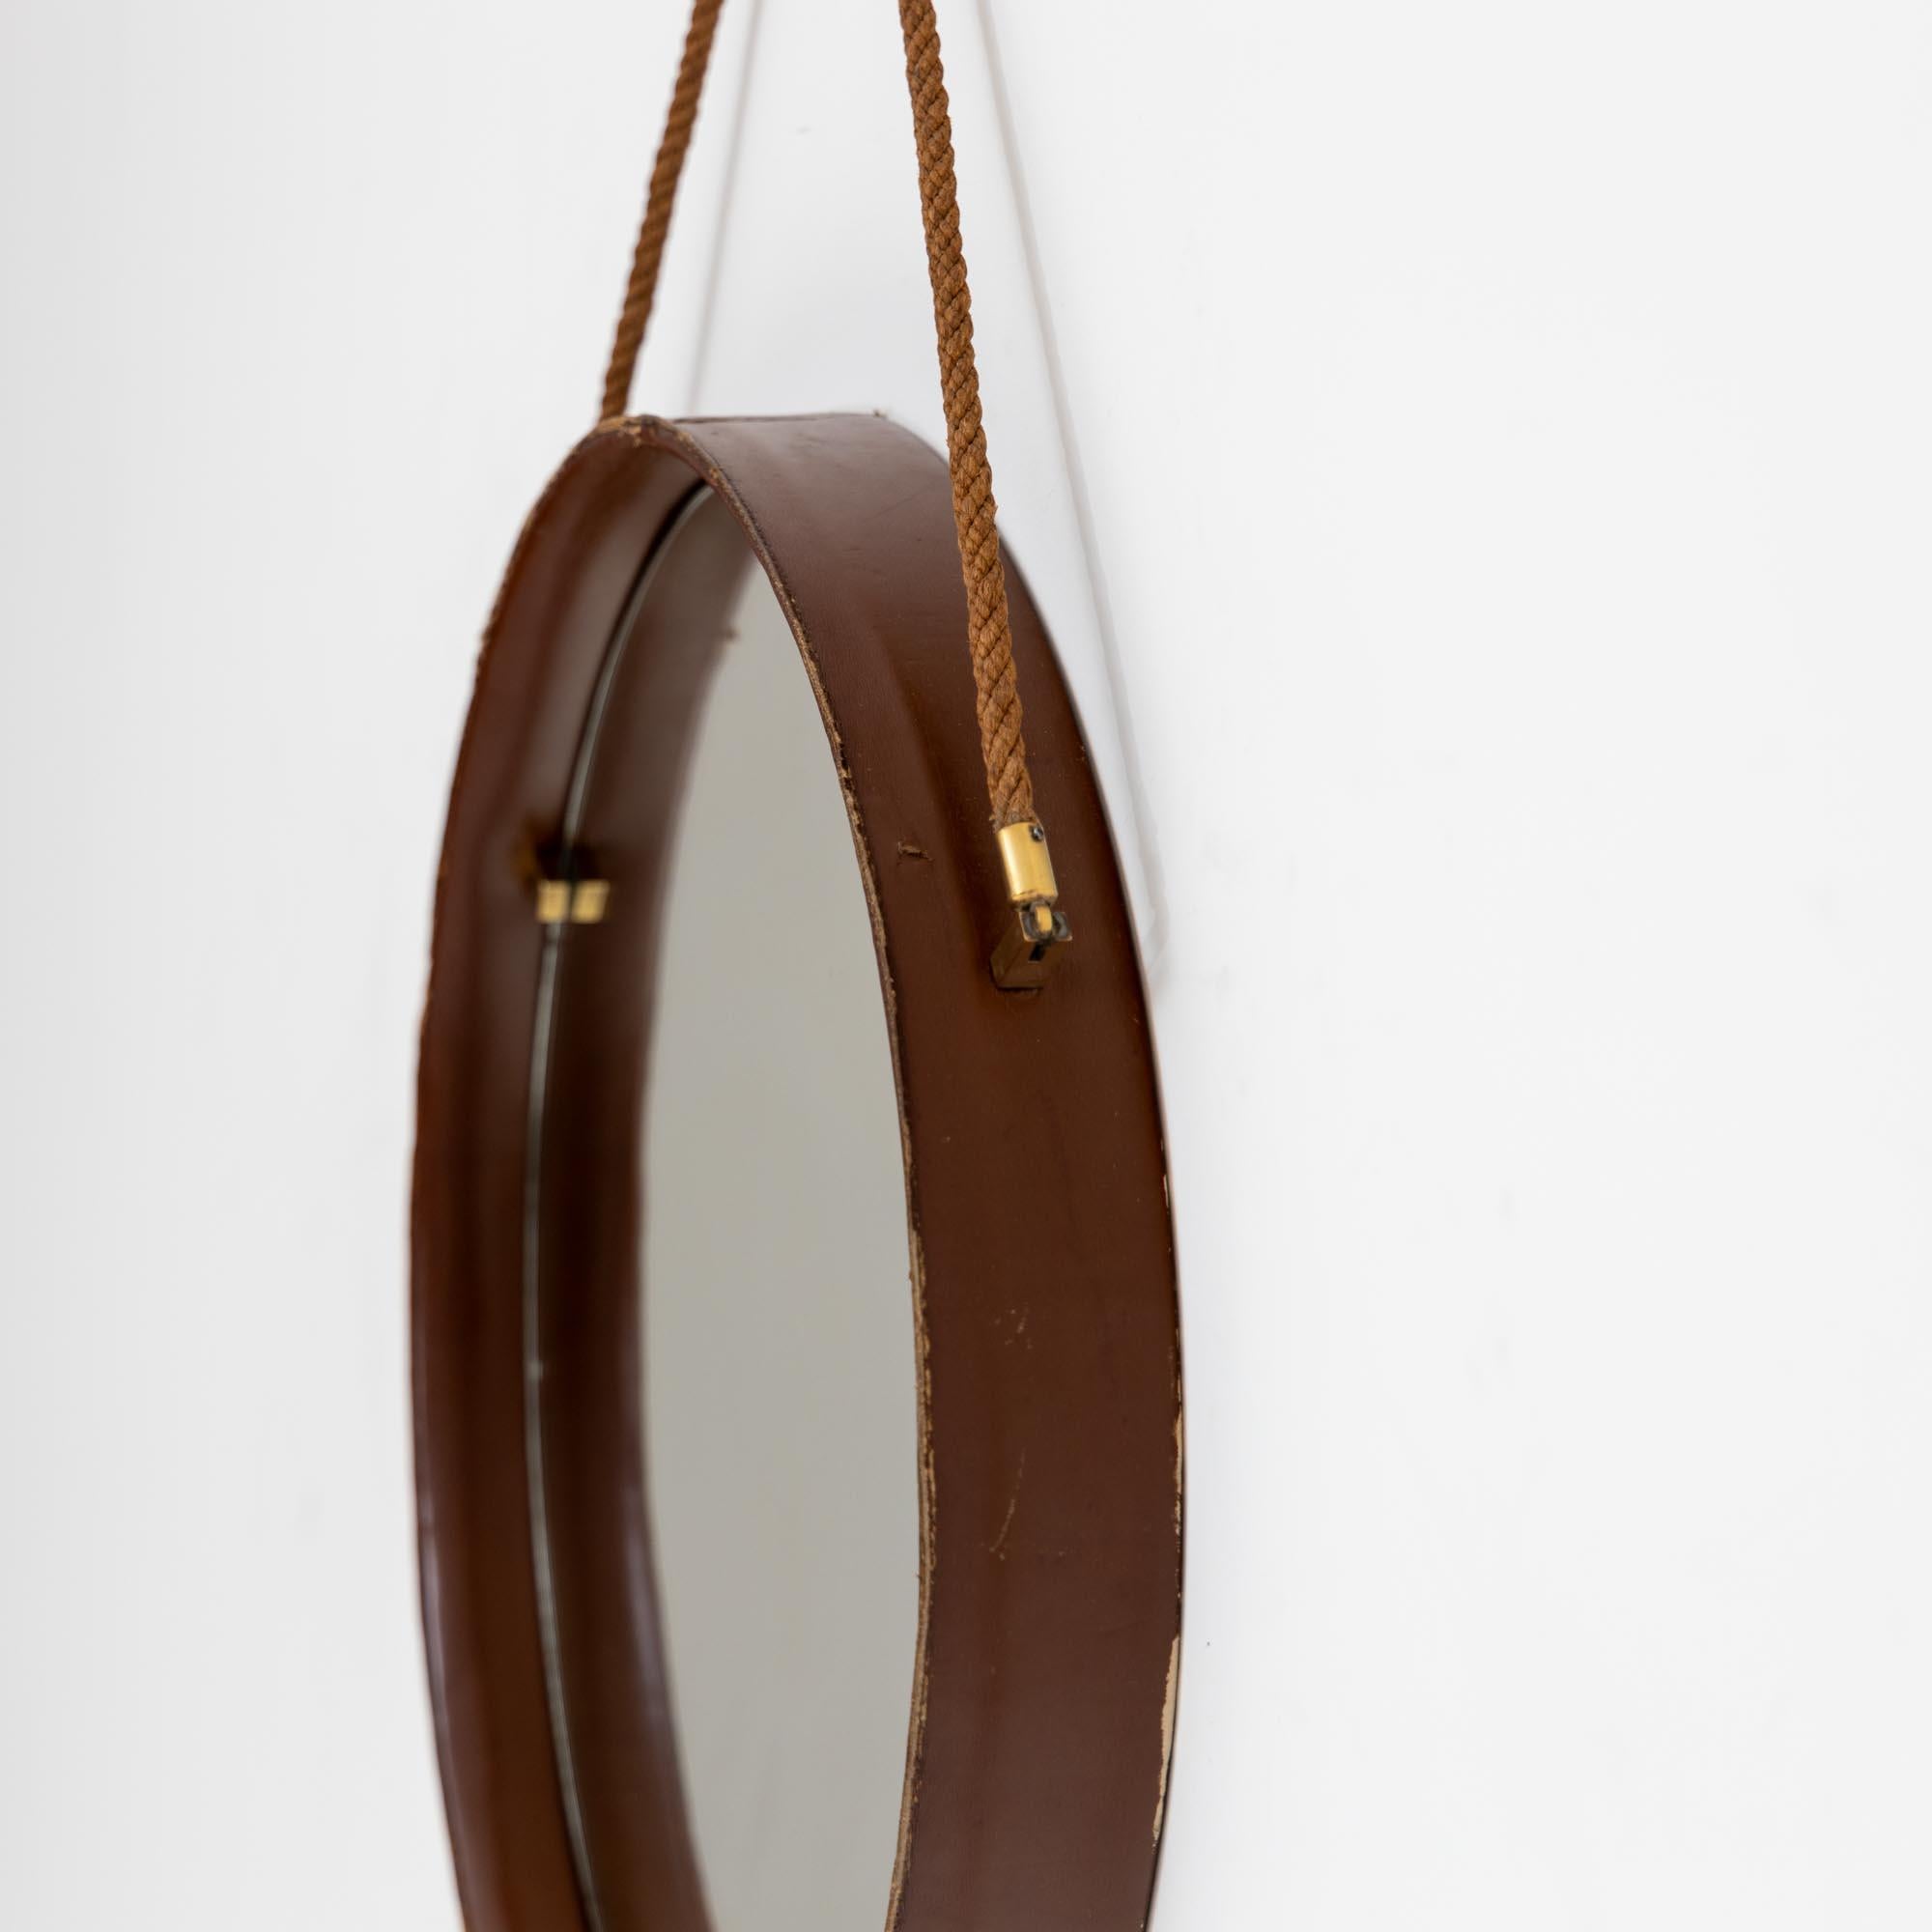 Round wall mirror with high rim with dark brown leather covering and short brass mountings. The mirror hangs on a short rope which is fixed at two points on the outer frame.